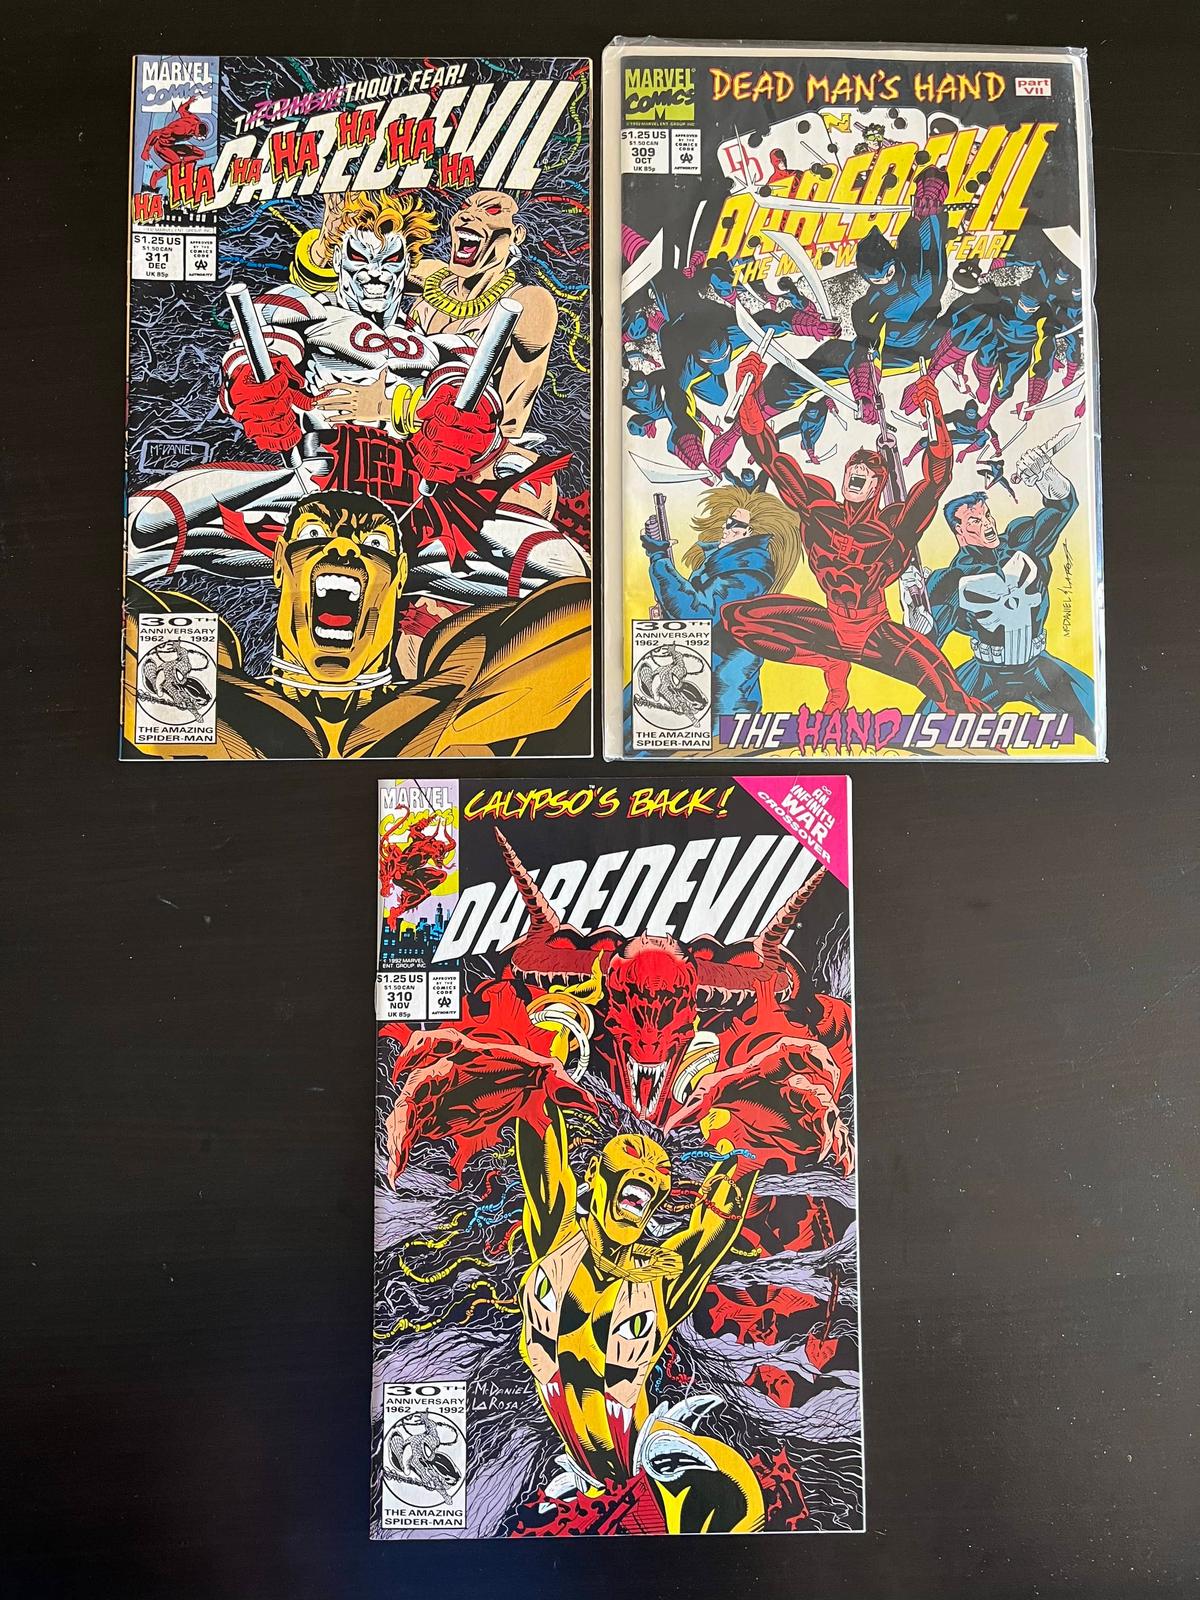 3 Issues Daredevil #309 #310 & #311 Marvel Comics 1992 Key #310 1st cover appearance of Calypso